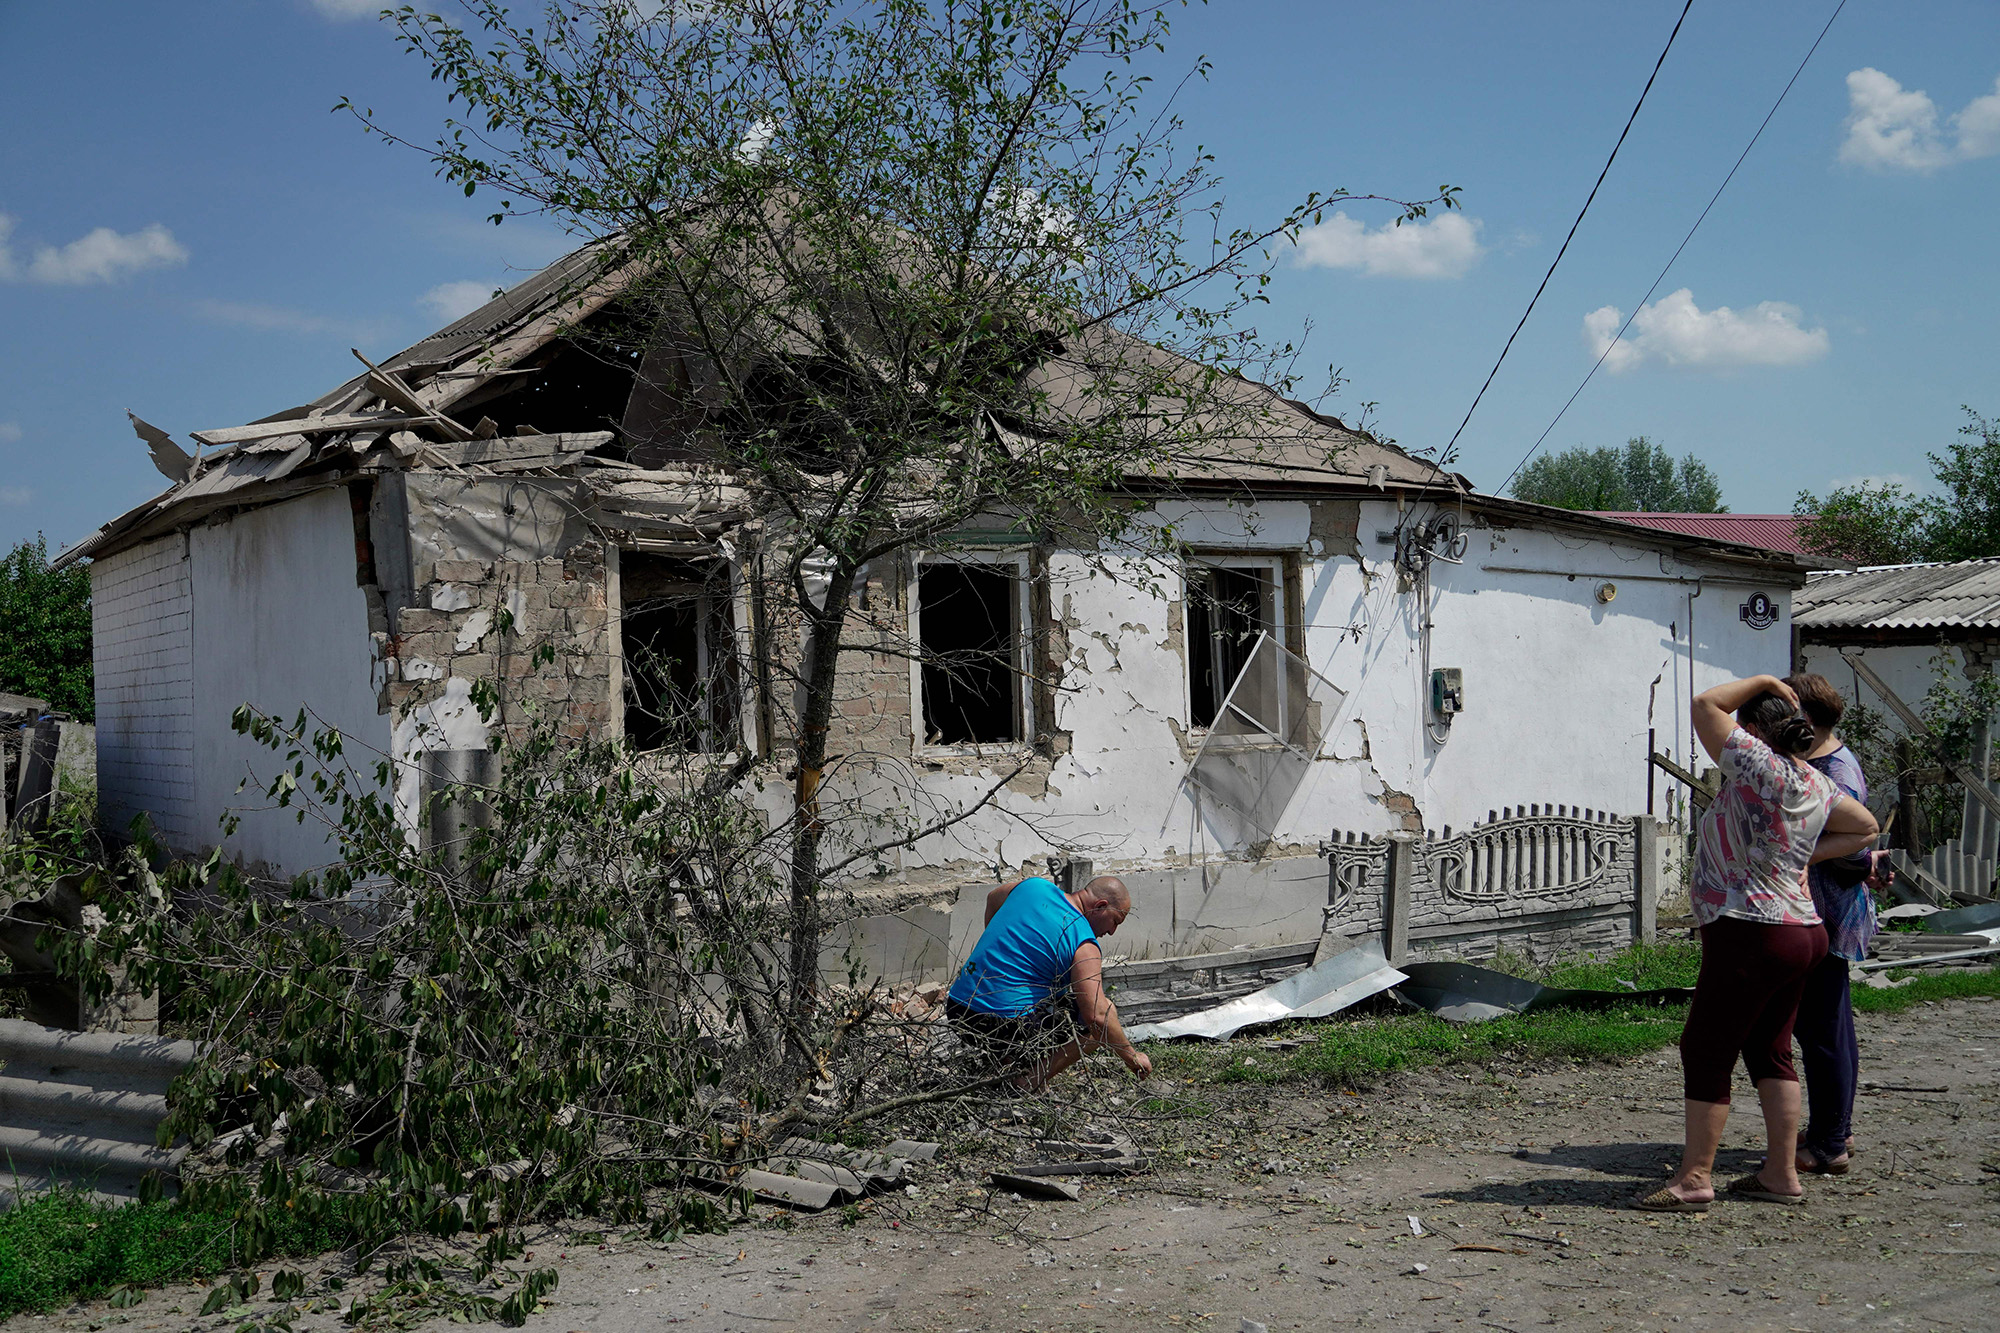 Women look at a house destroyed by recent Ukrainian strikes in the town of Valuyki in the Belgorod region, Russia, on July 5.